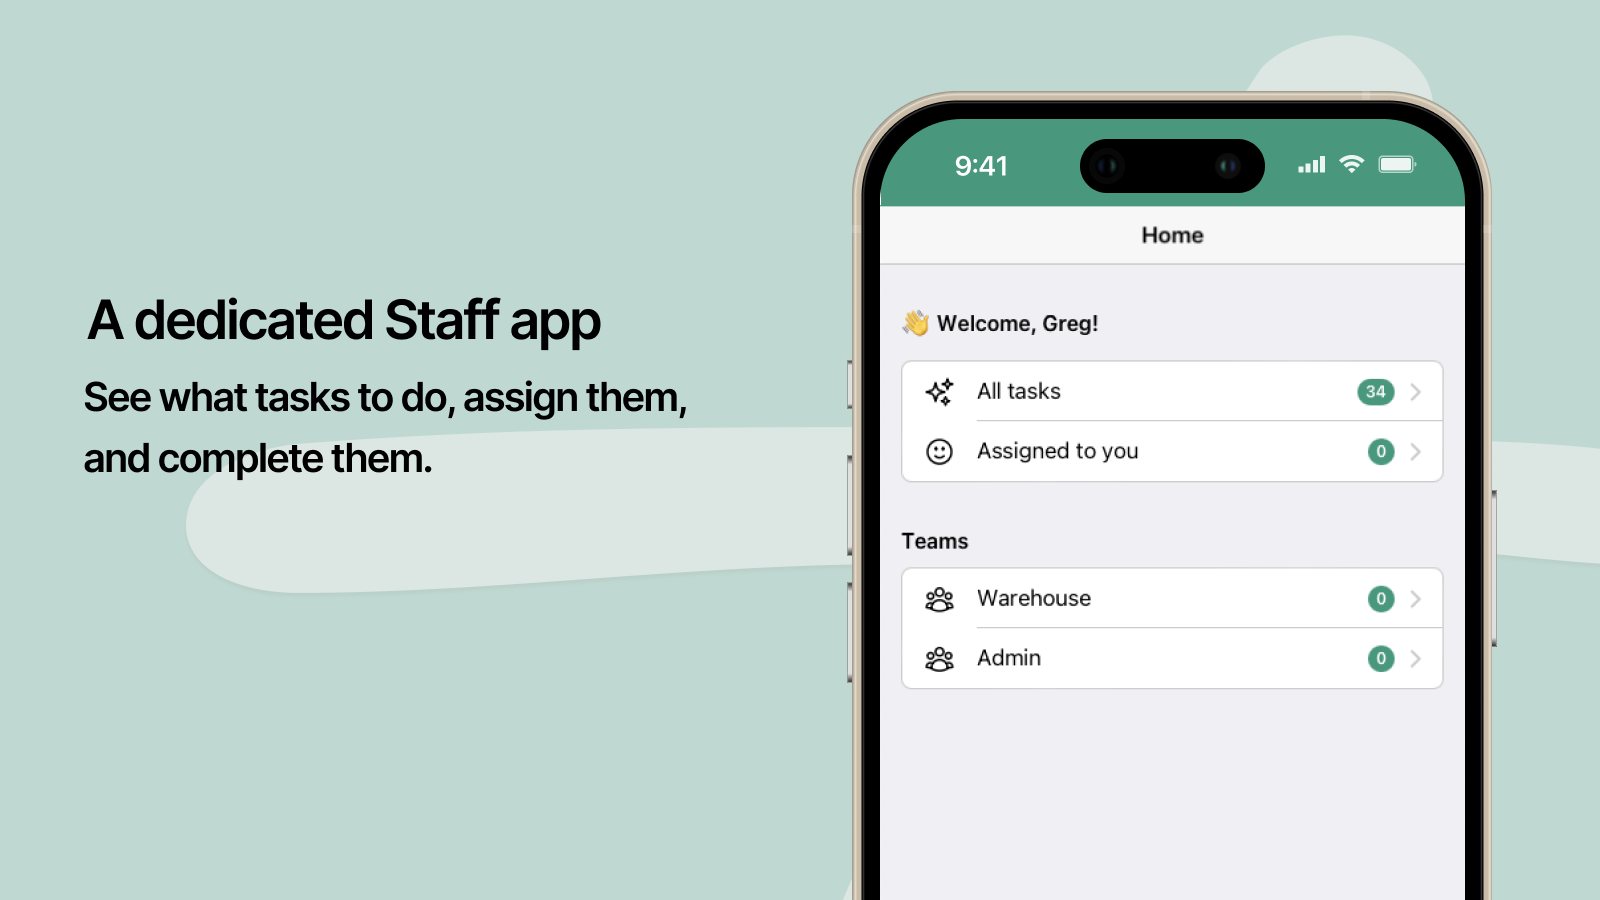 See what tasks to do and complete them in our Staff app